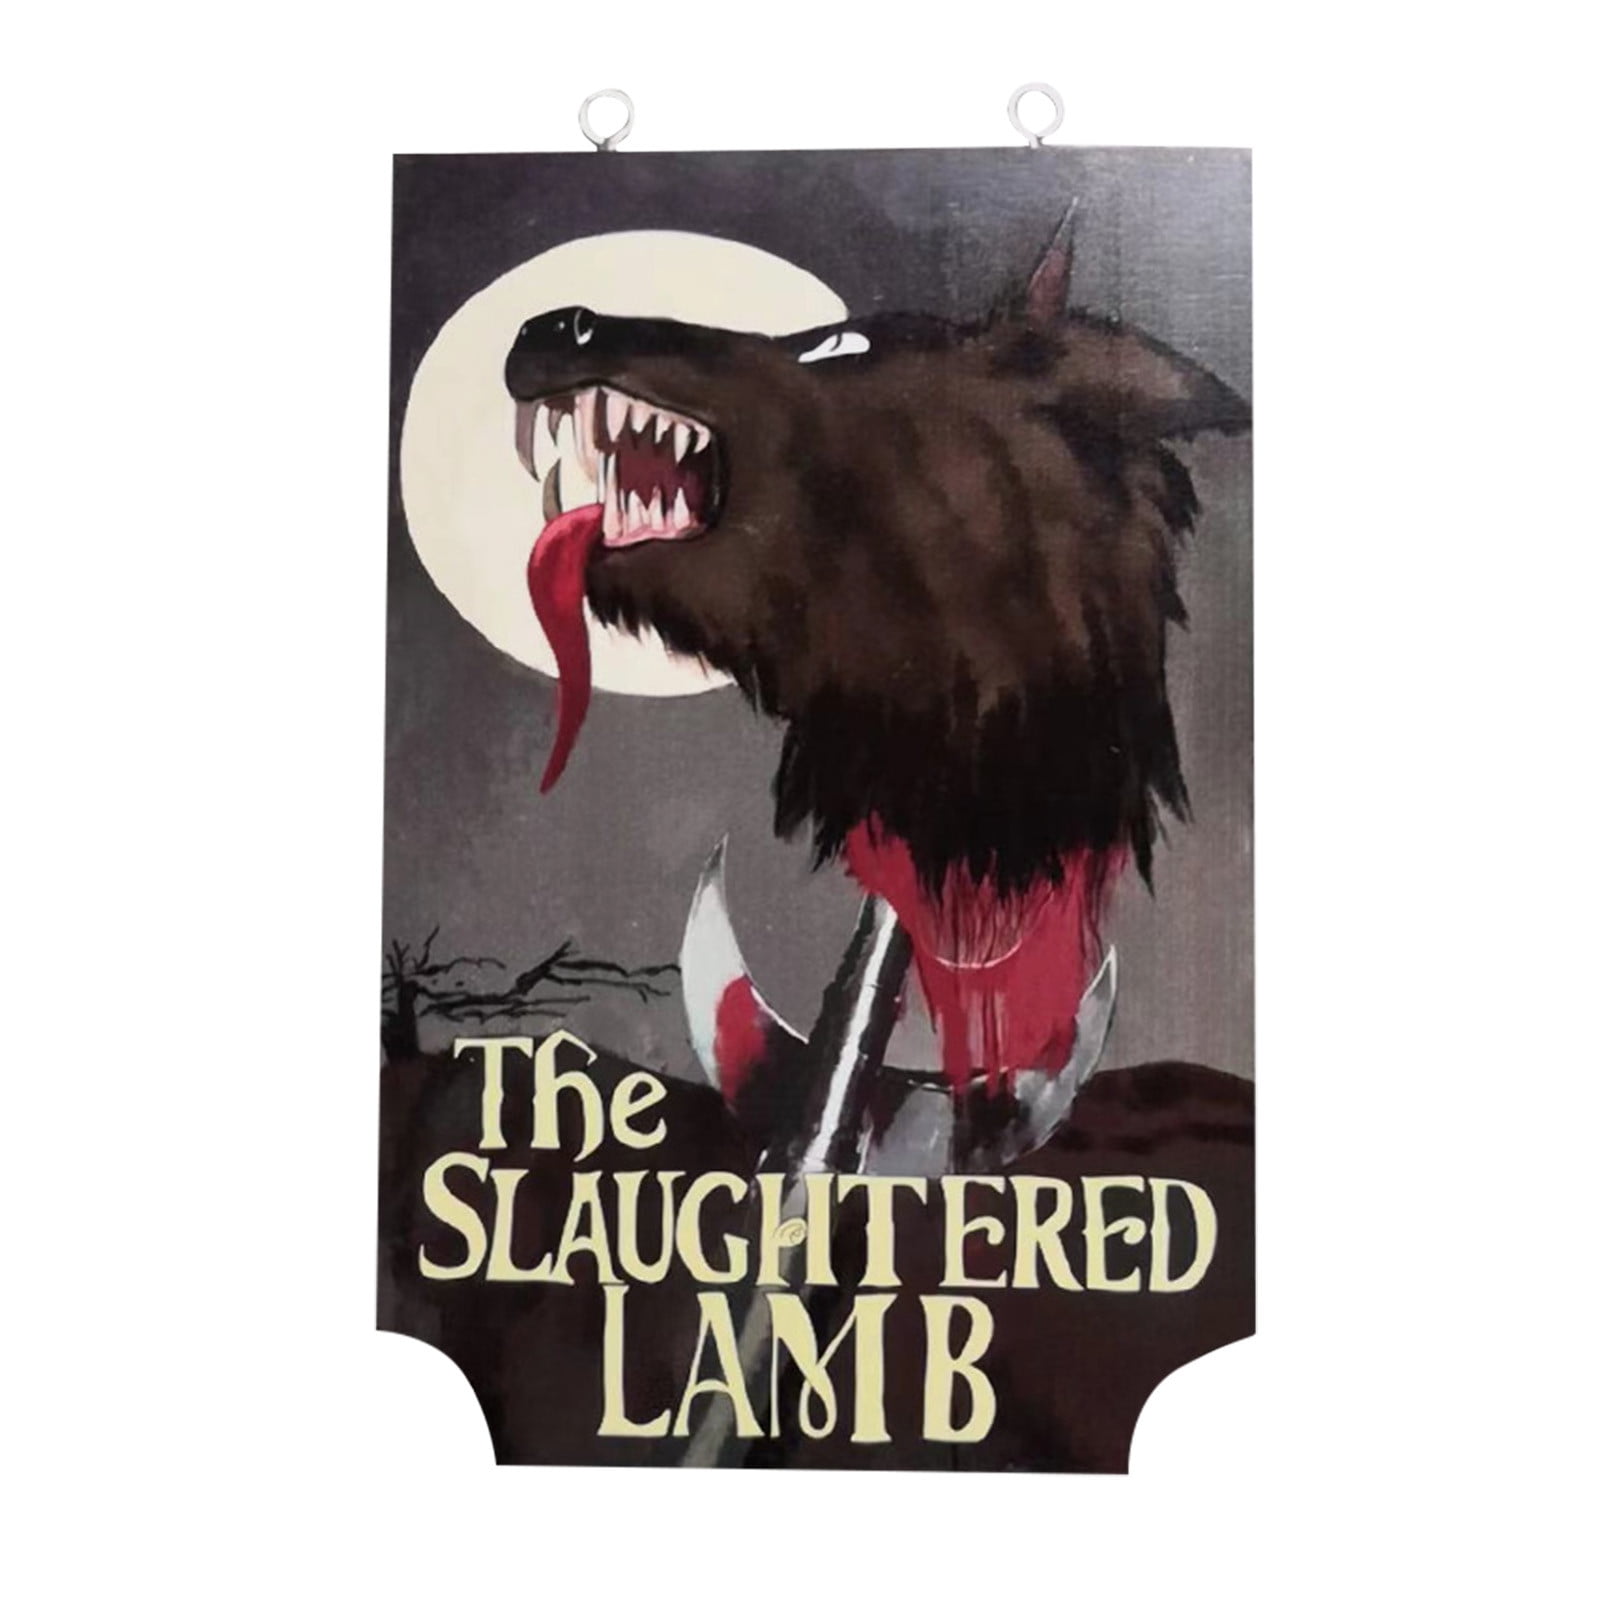 MINI PUB SIGN 18 inch THE SLAUGHTERED LAMB An American werewolf in London 